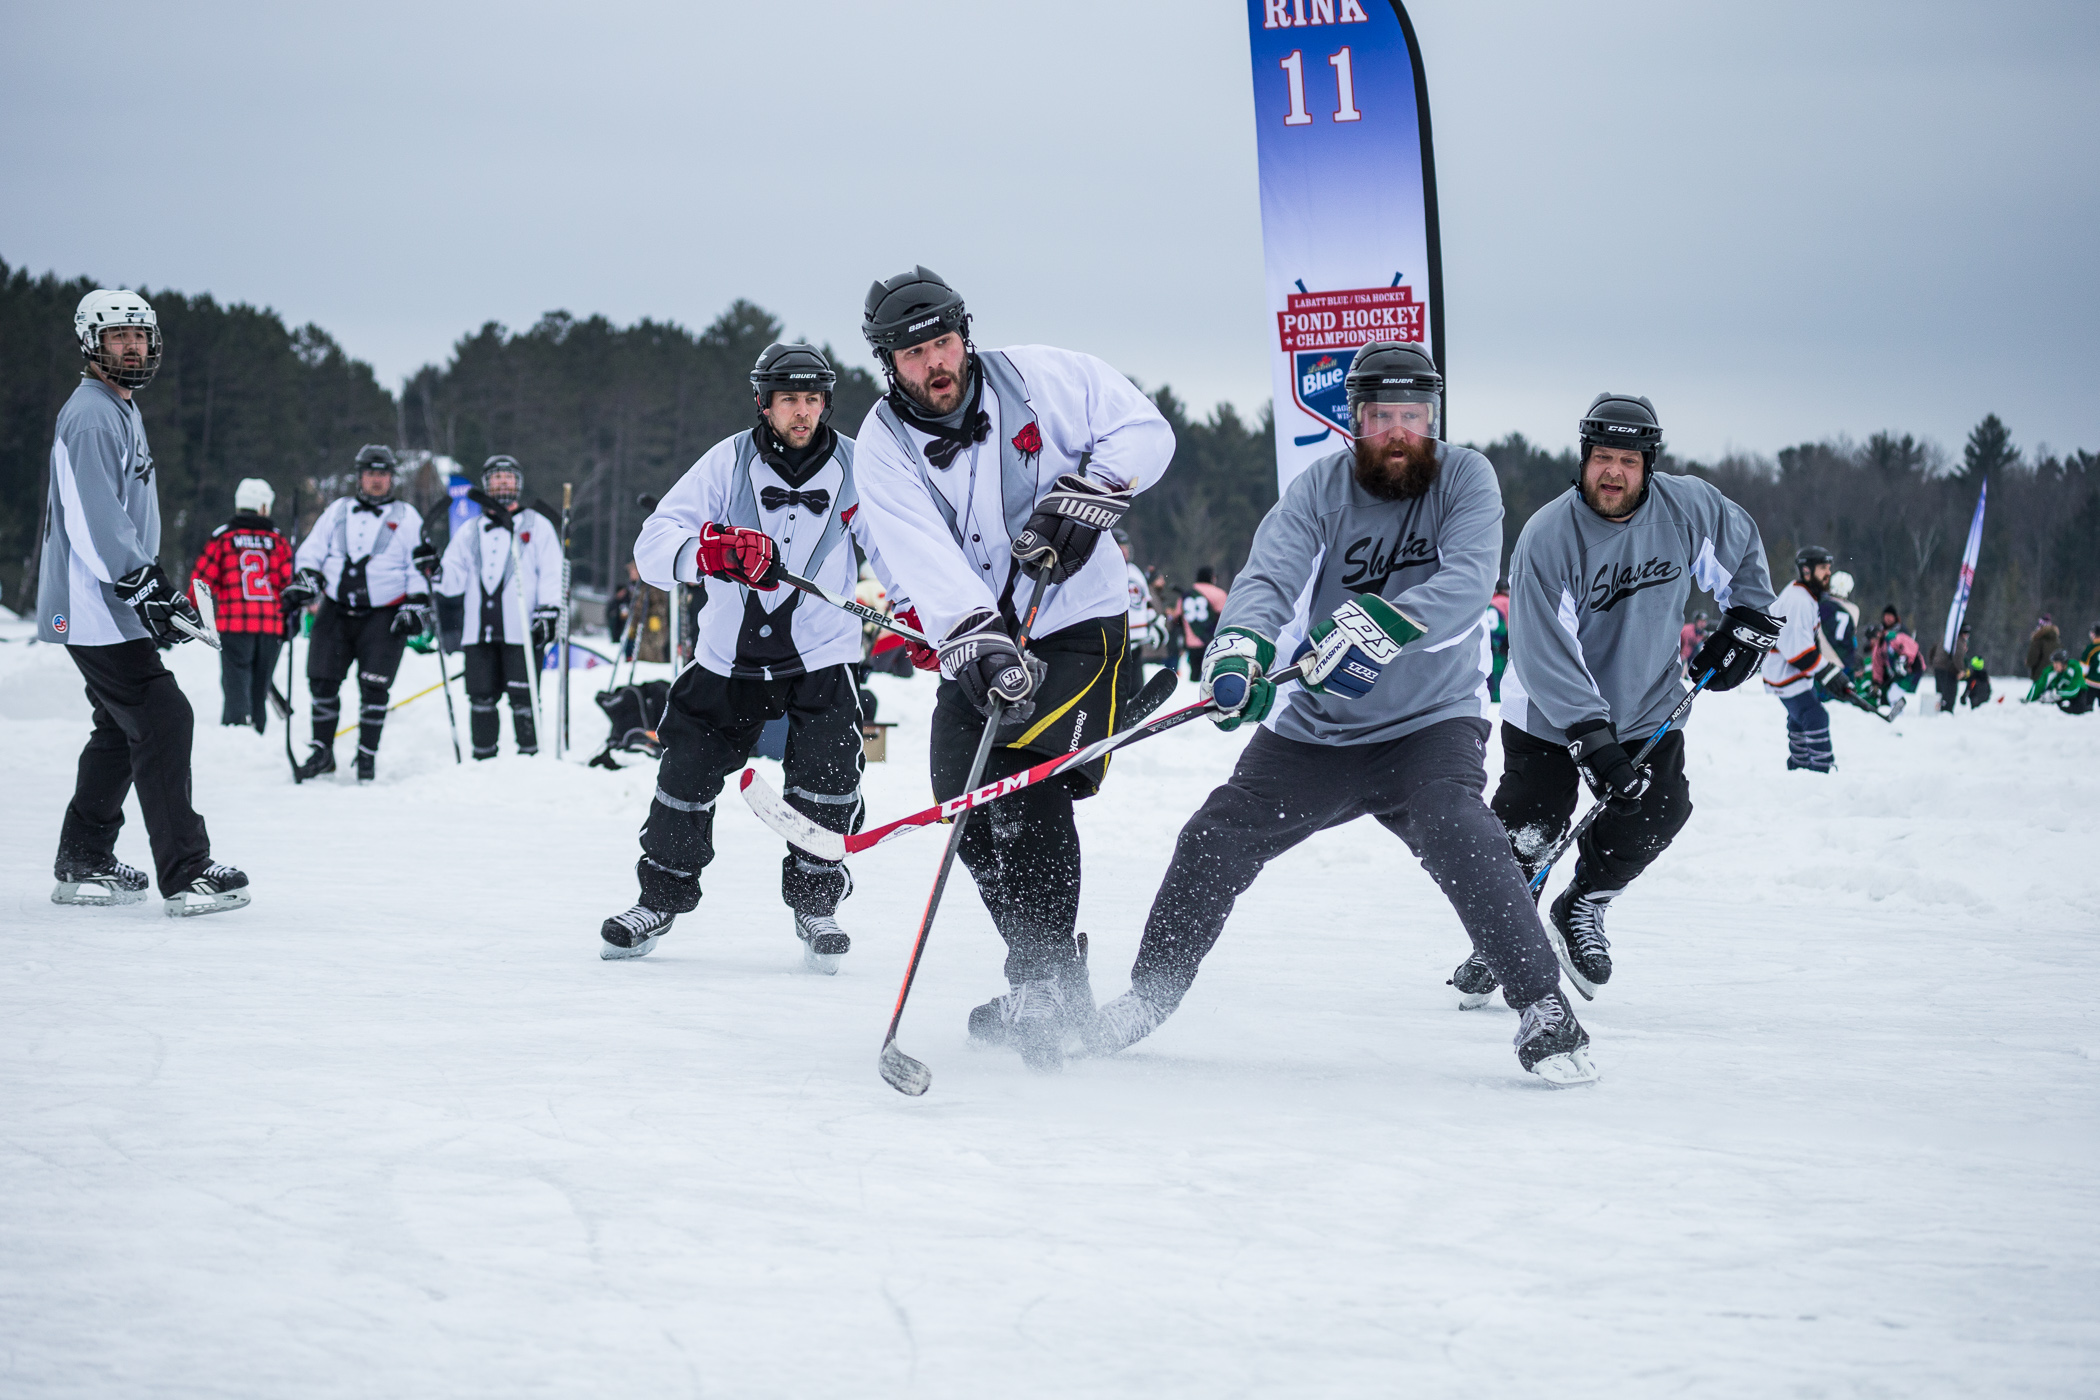 Welcome To Our 8th Year At The Labatt Blue Pond Hockey Tournament